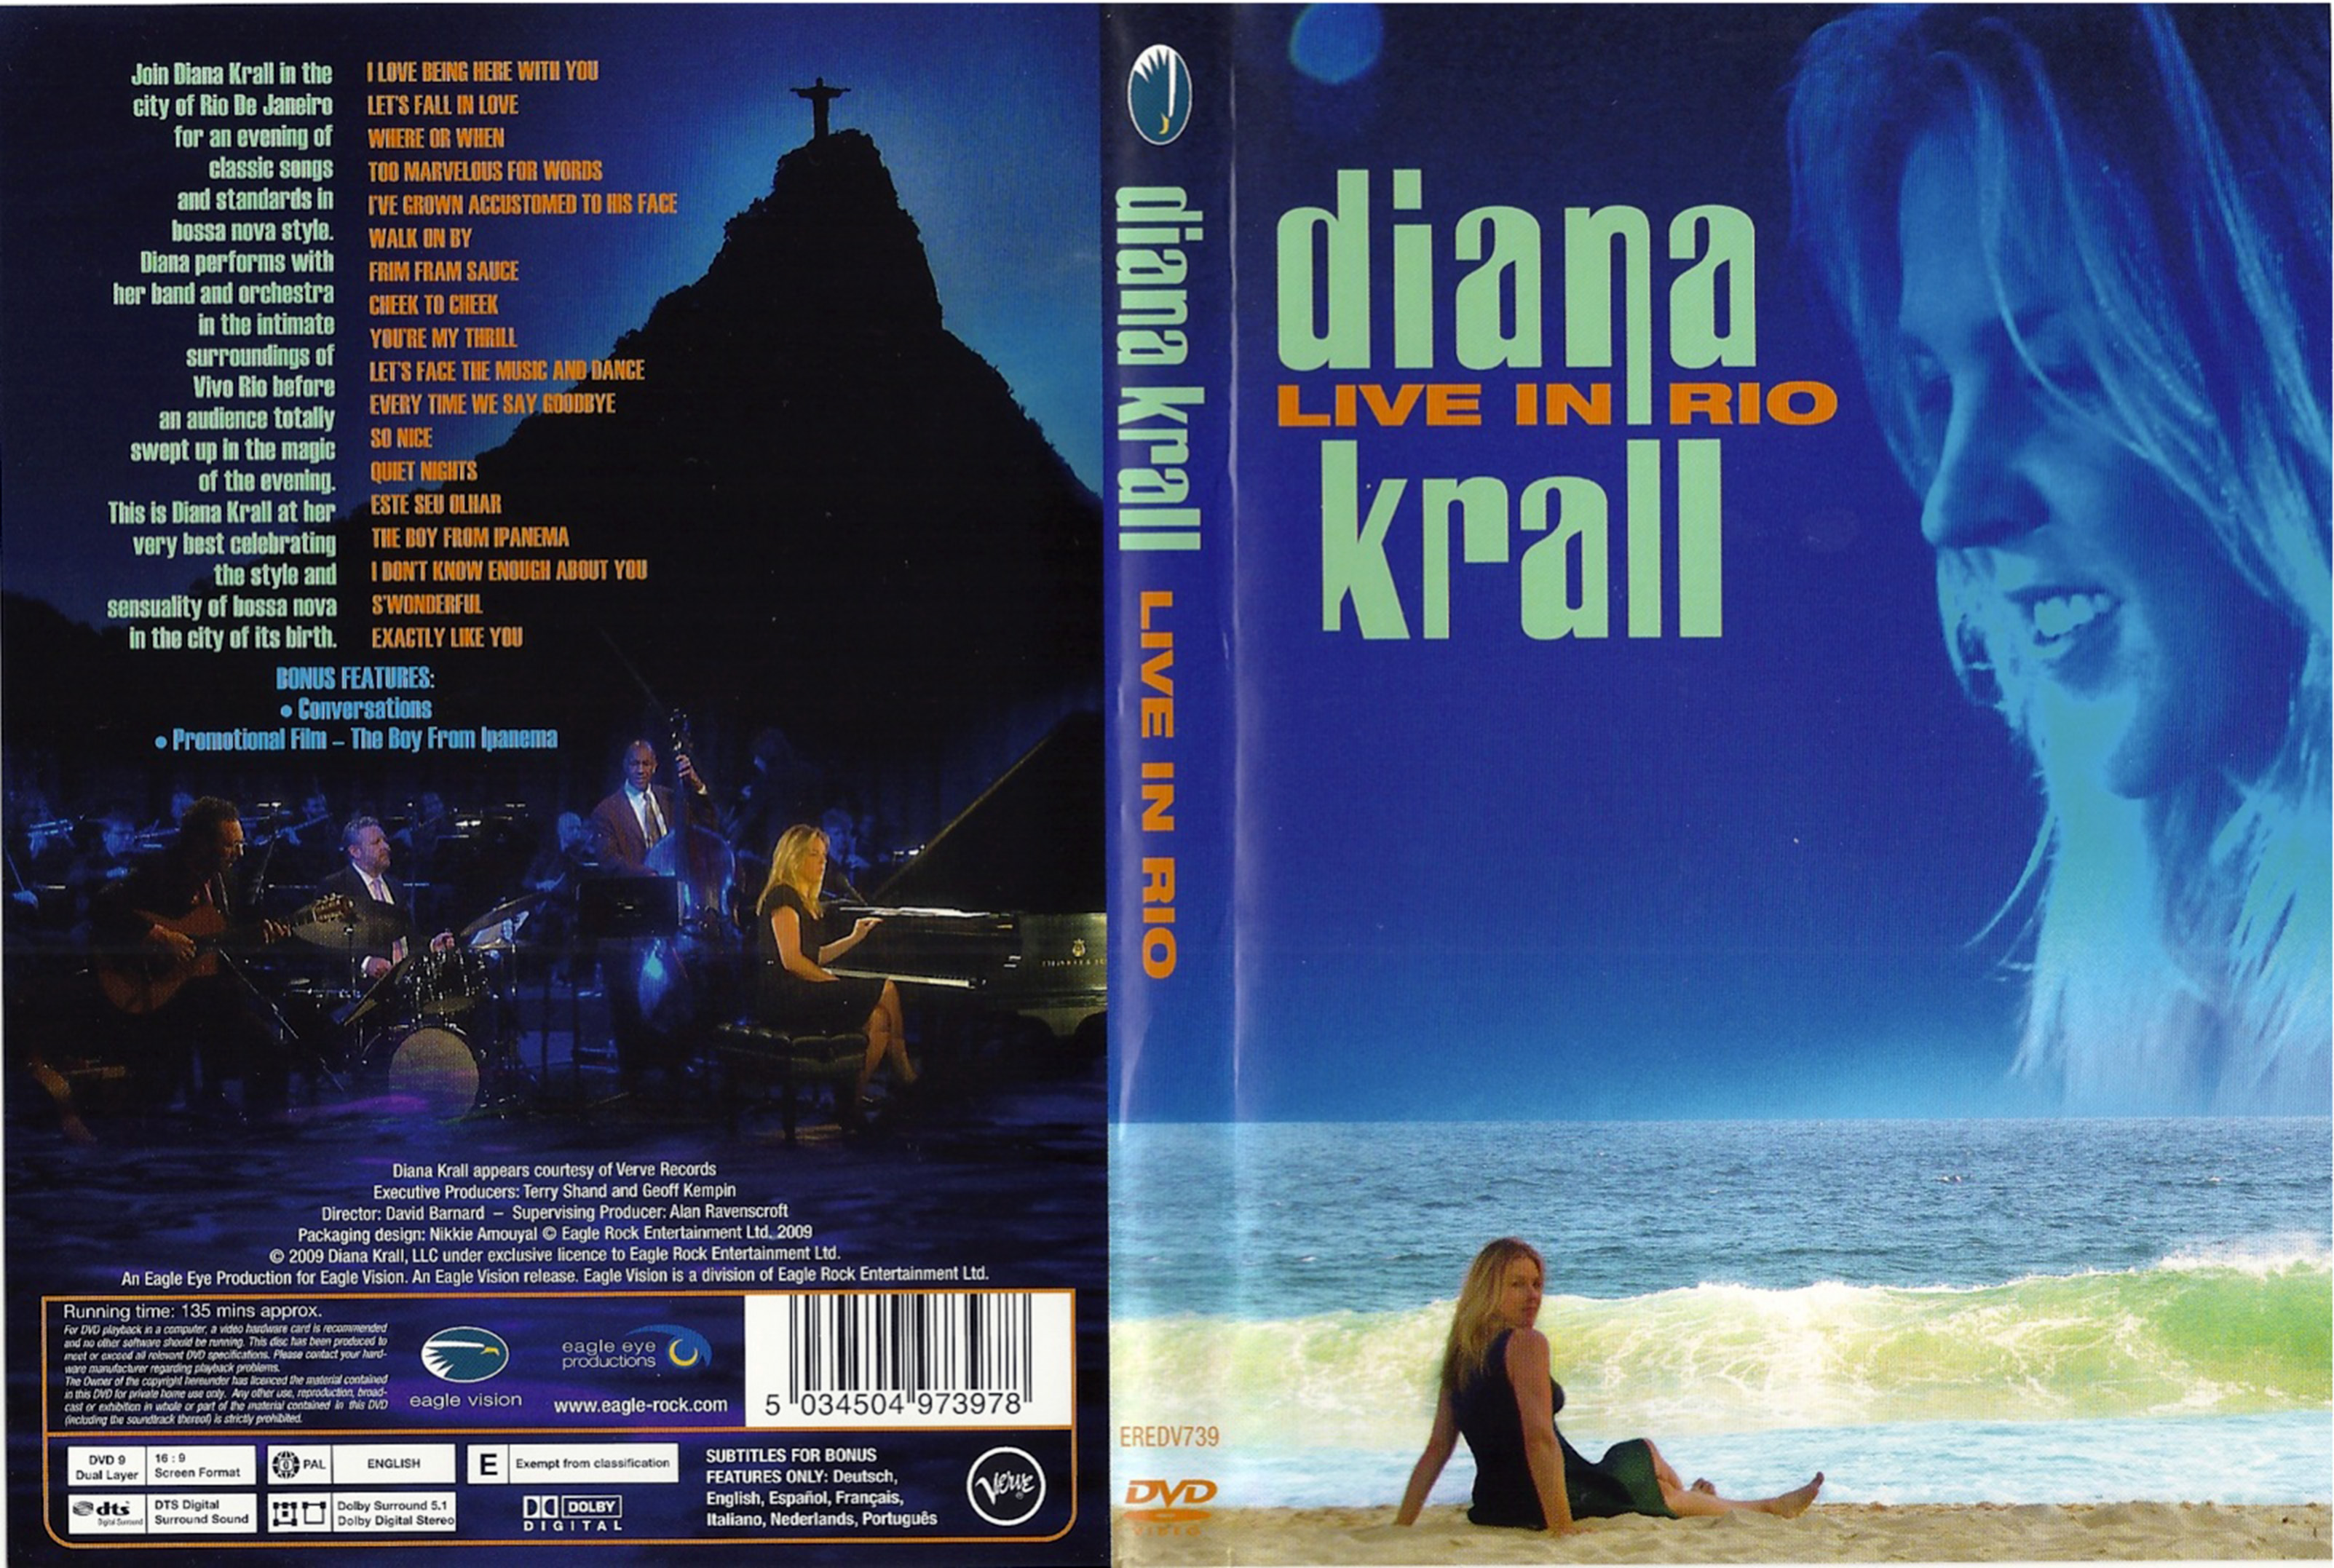 Jaquette DVD Diana Krall Live in Rio